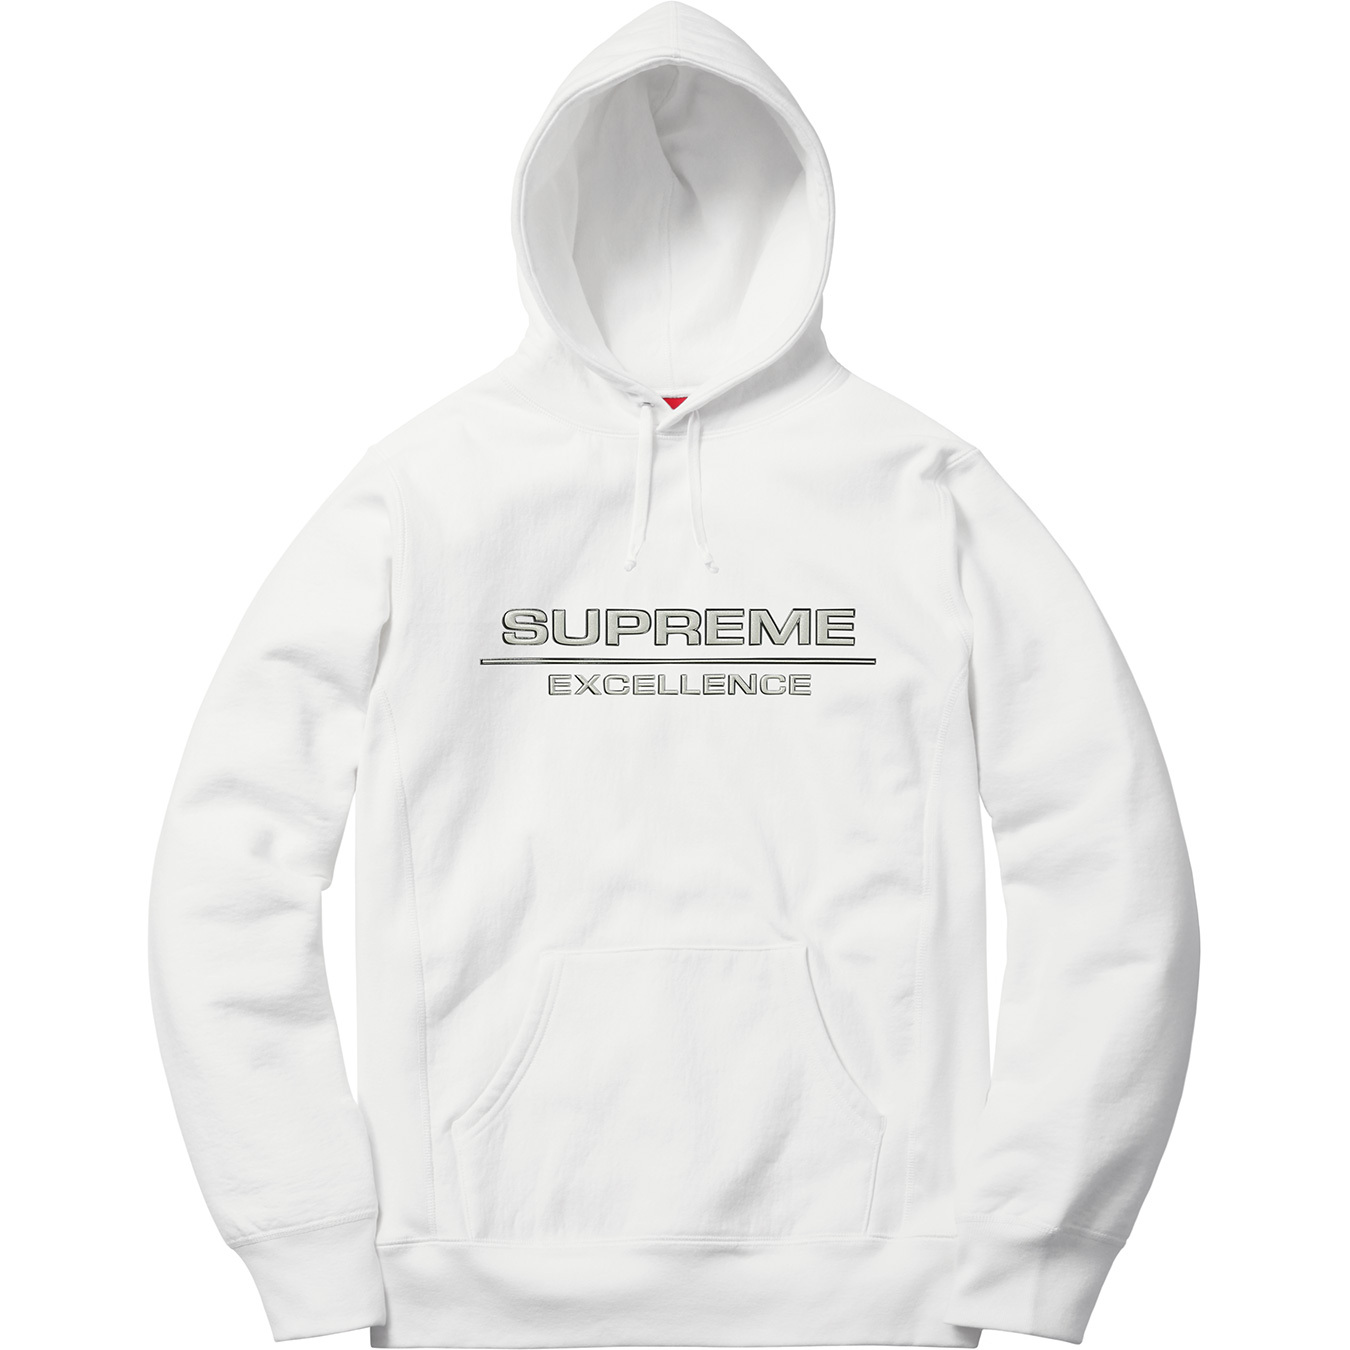 Supreme Reflective Excellence Hooded Sweatshirt White Men's - FW17